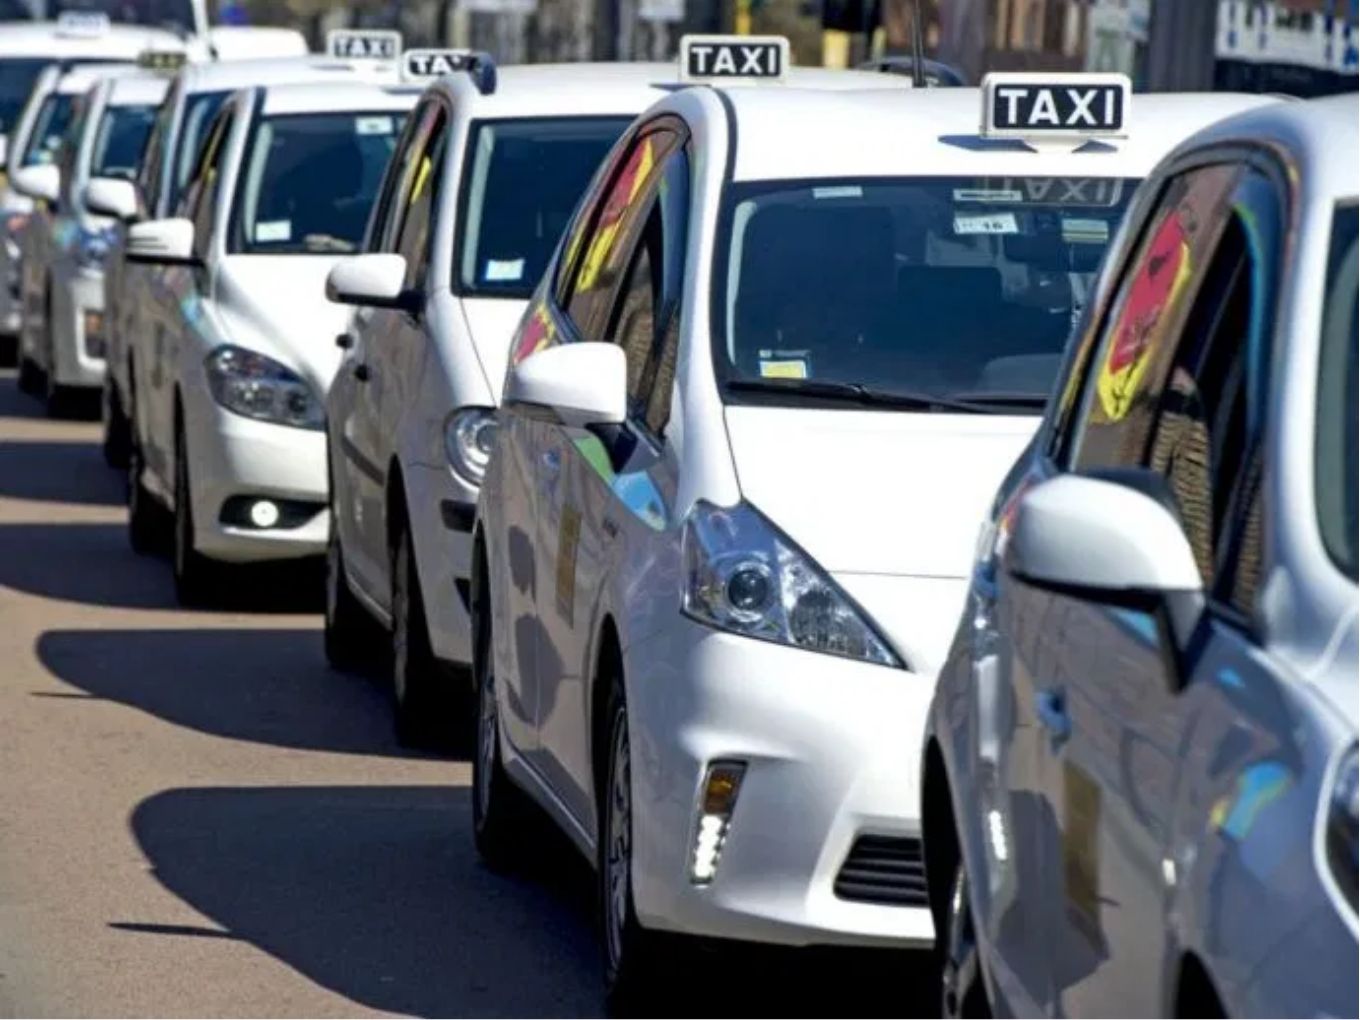 Ola, Uber To Take U-turn From Parking Spots At Railway Stations